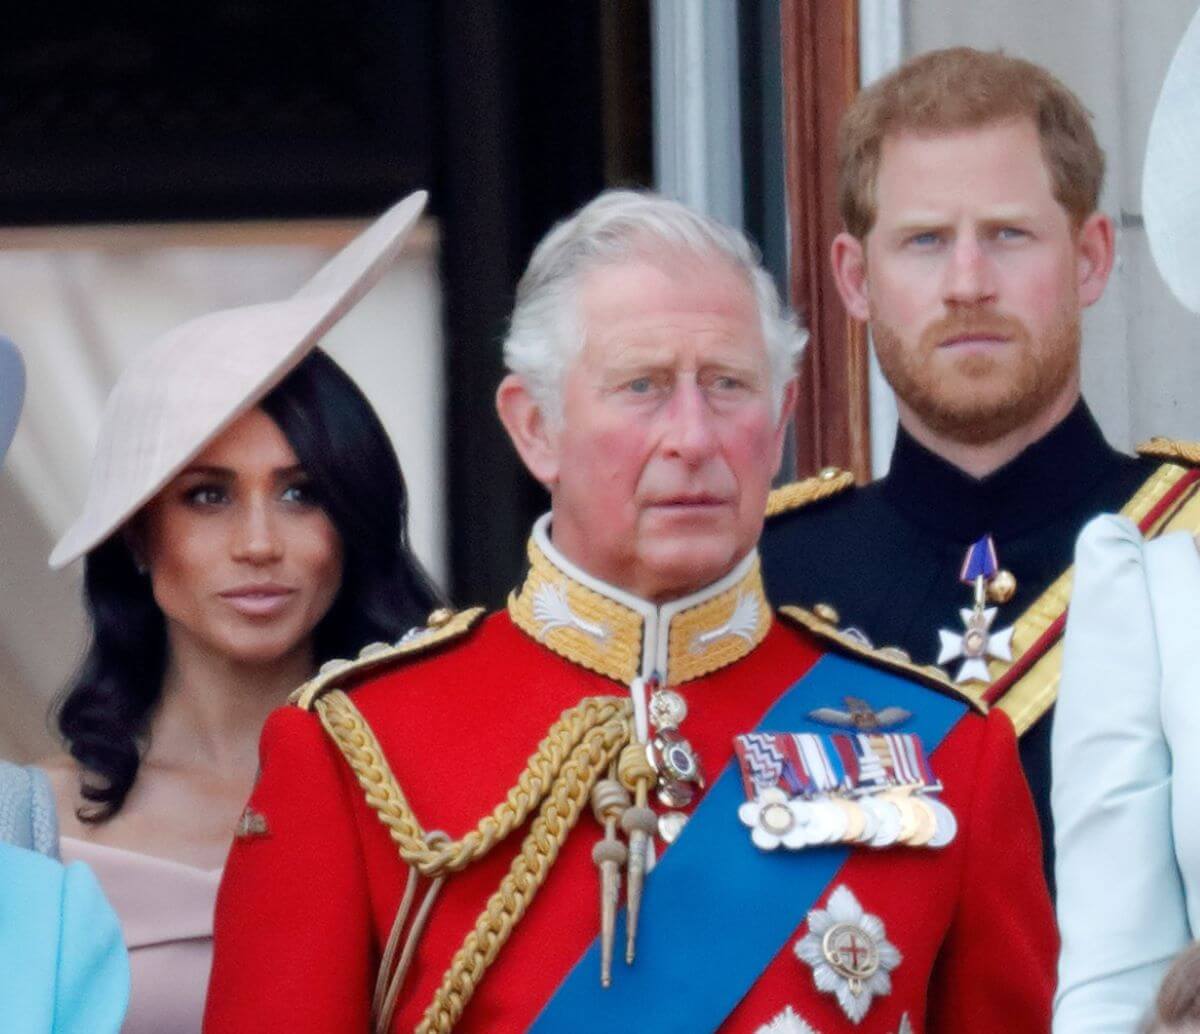 Meghan Markle, Prince Harry and King Charles III standing on the balcony of Buckingham Palace during Trooping The Colour 2018